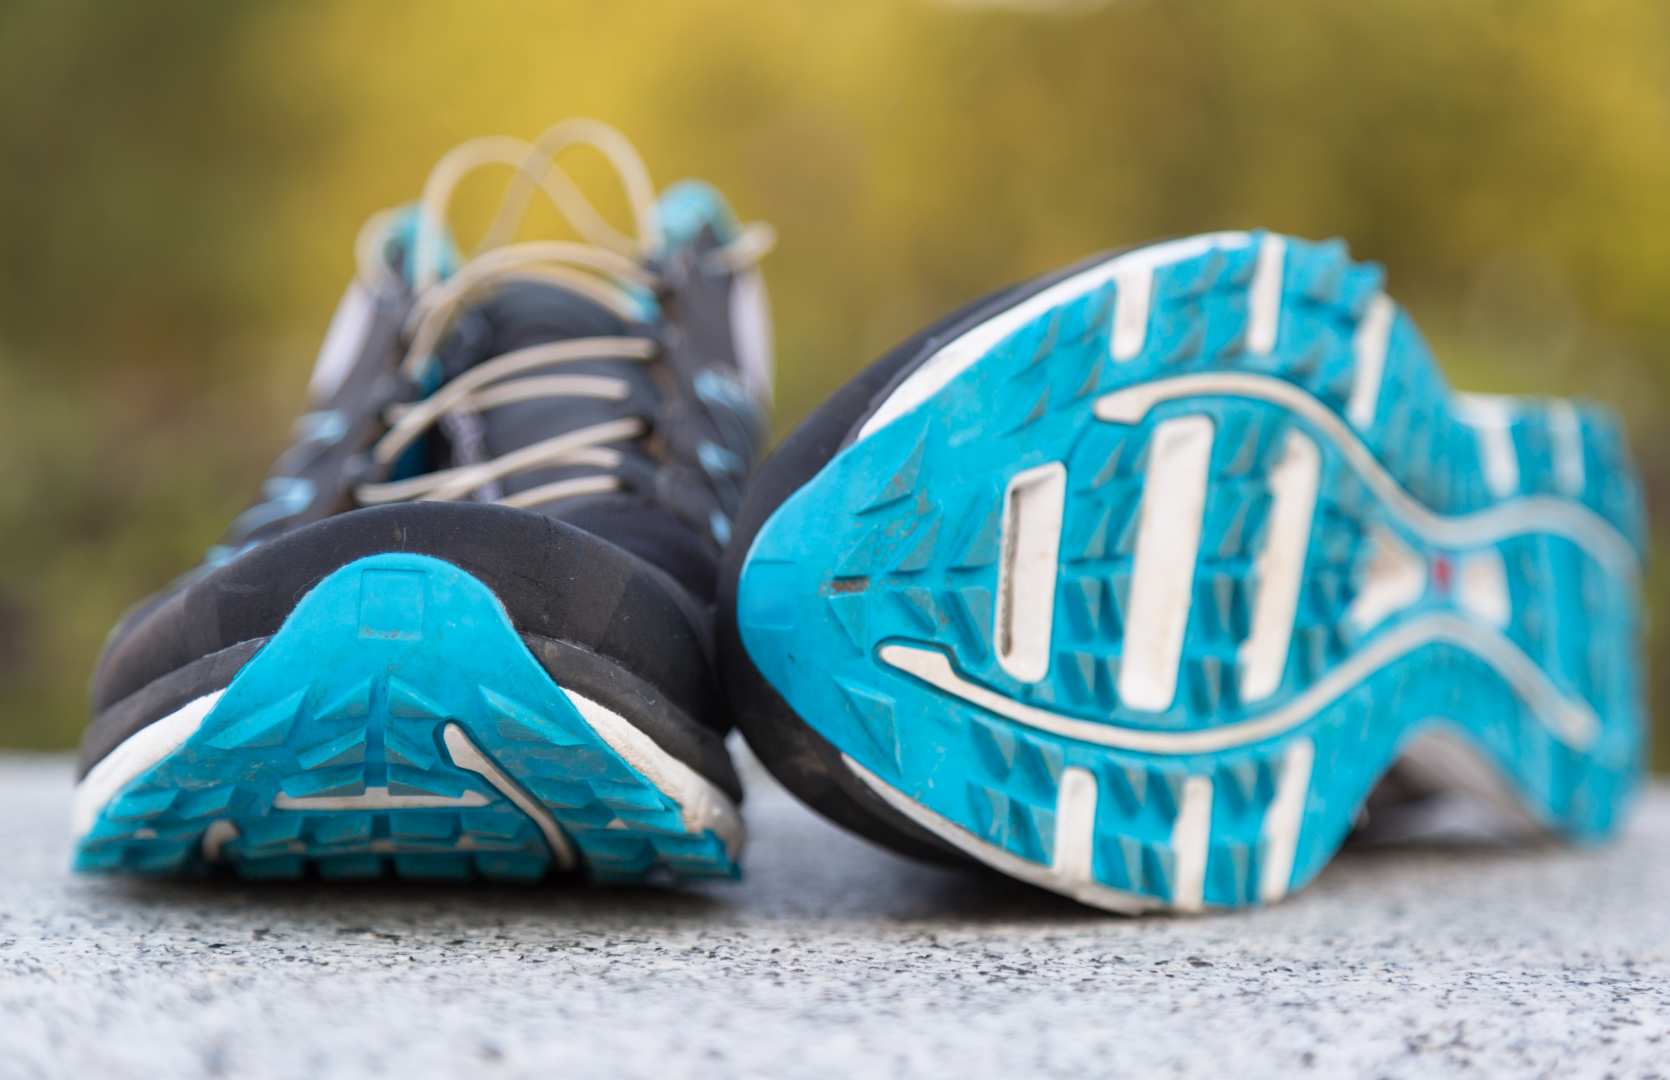 Running shoes - the core of a running holiday kit list